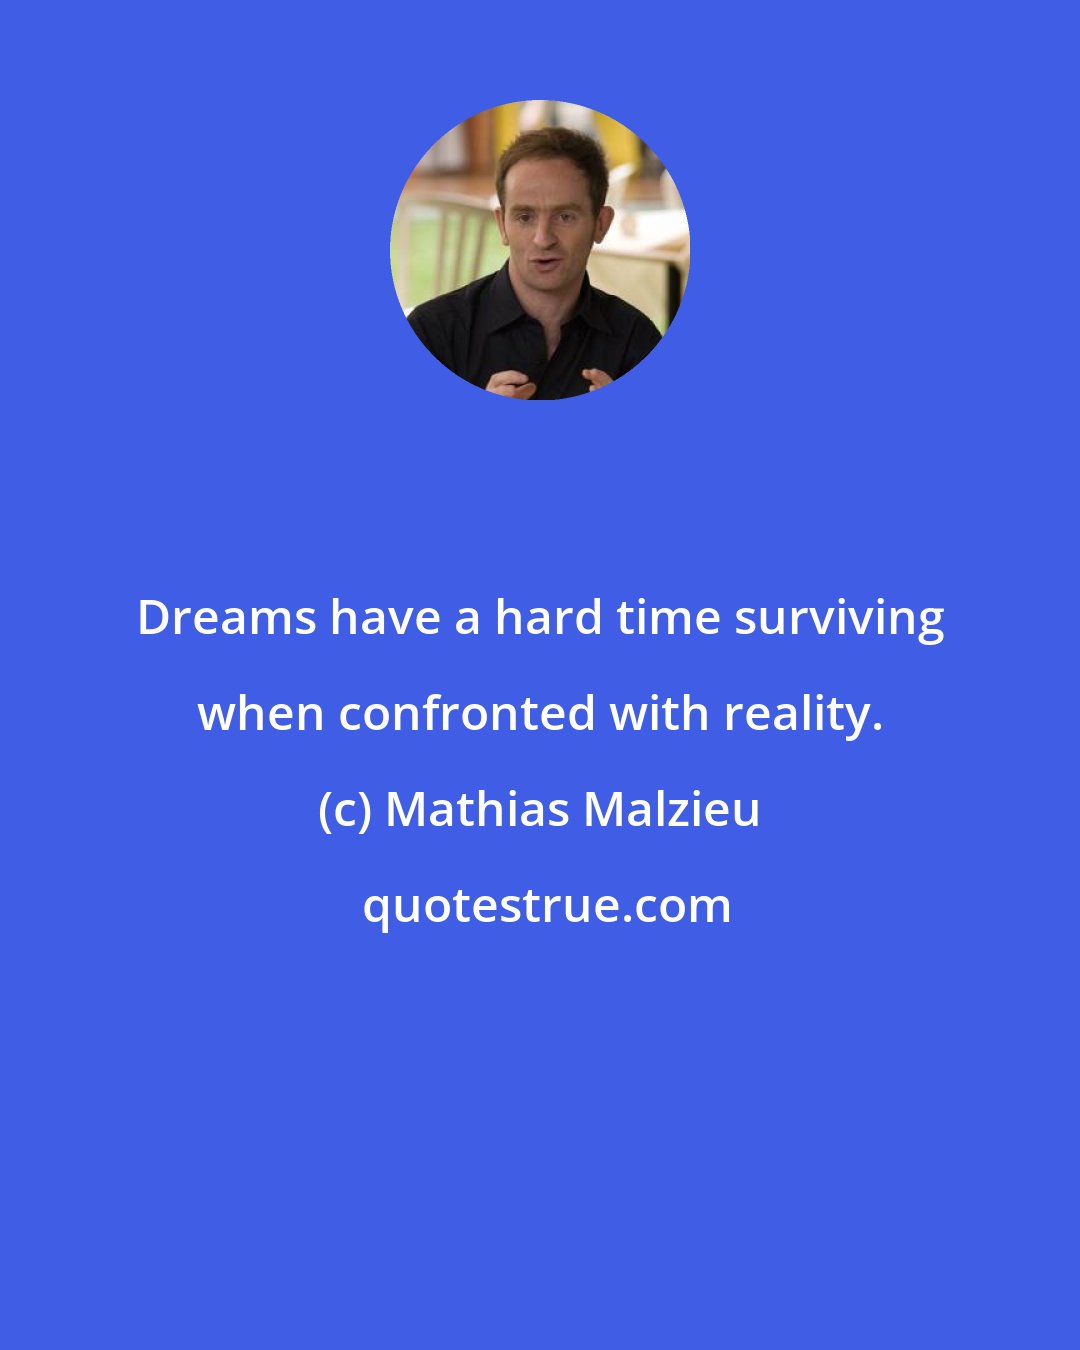 Mathias Malzieu: Dreams have a hard time surviving when confronted with reality.